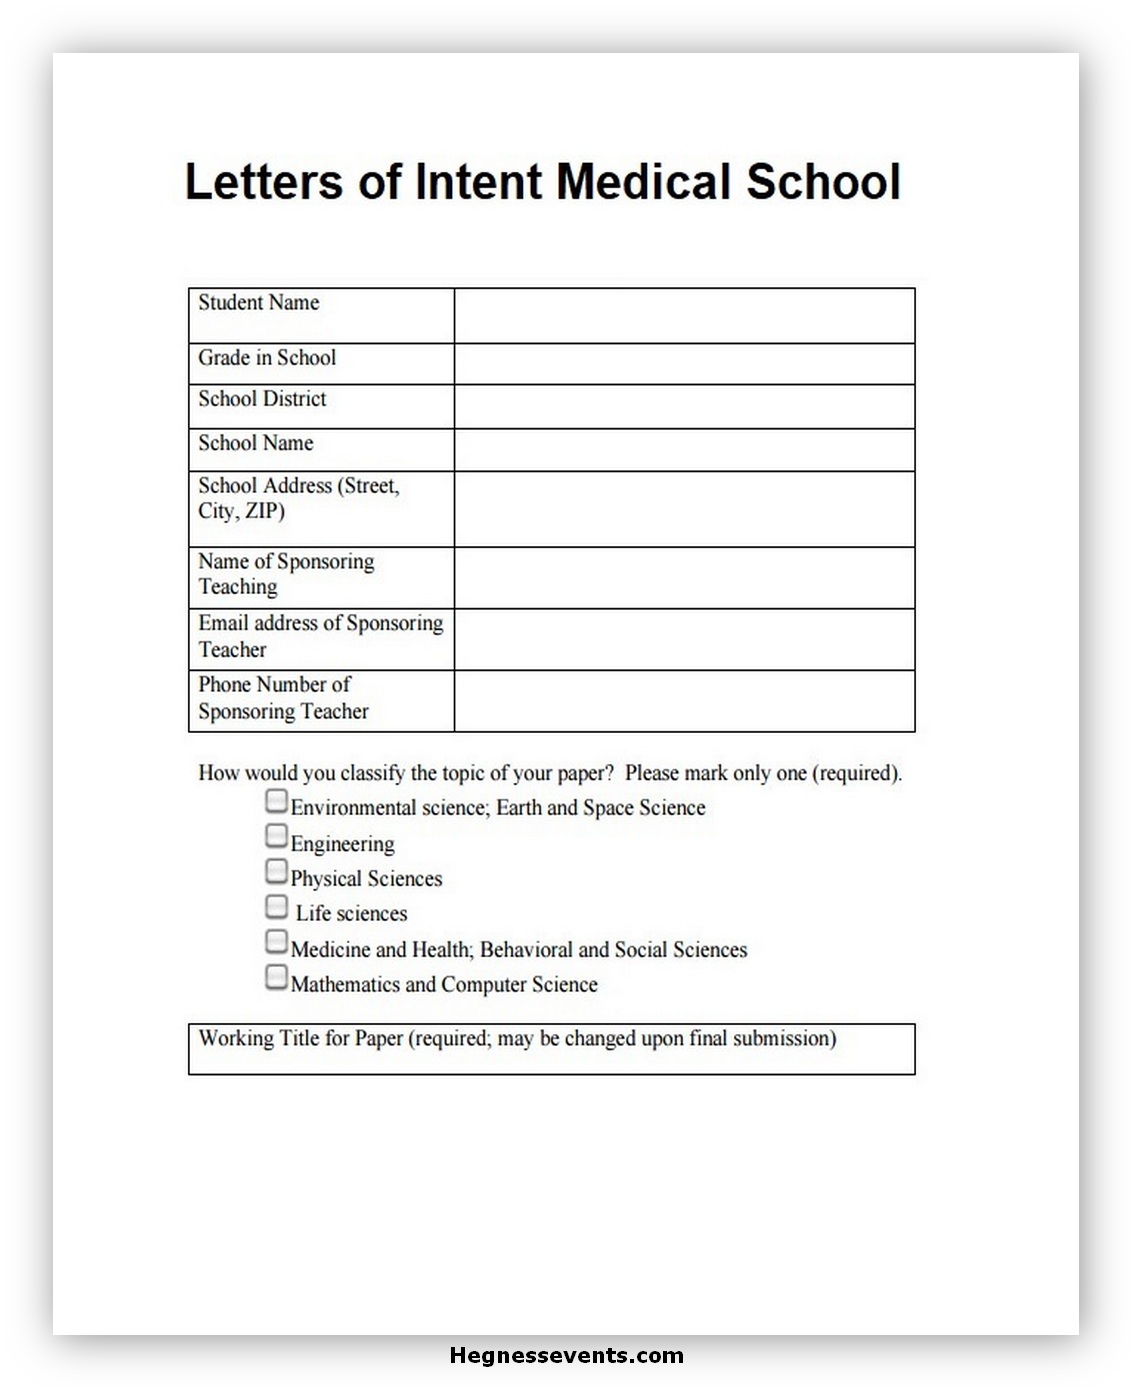 Letters of Intent Medical School 02